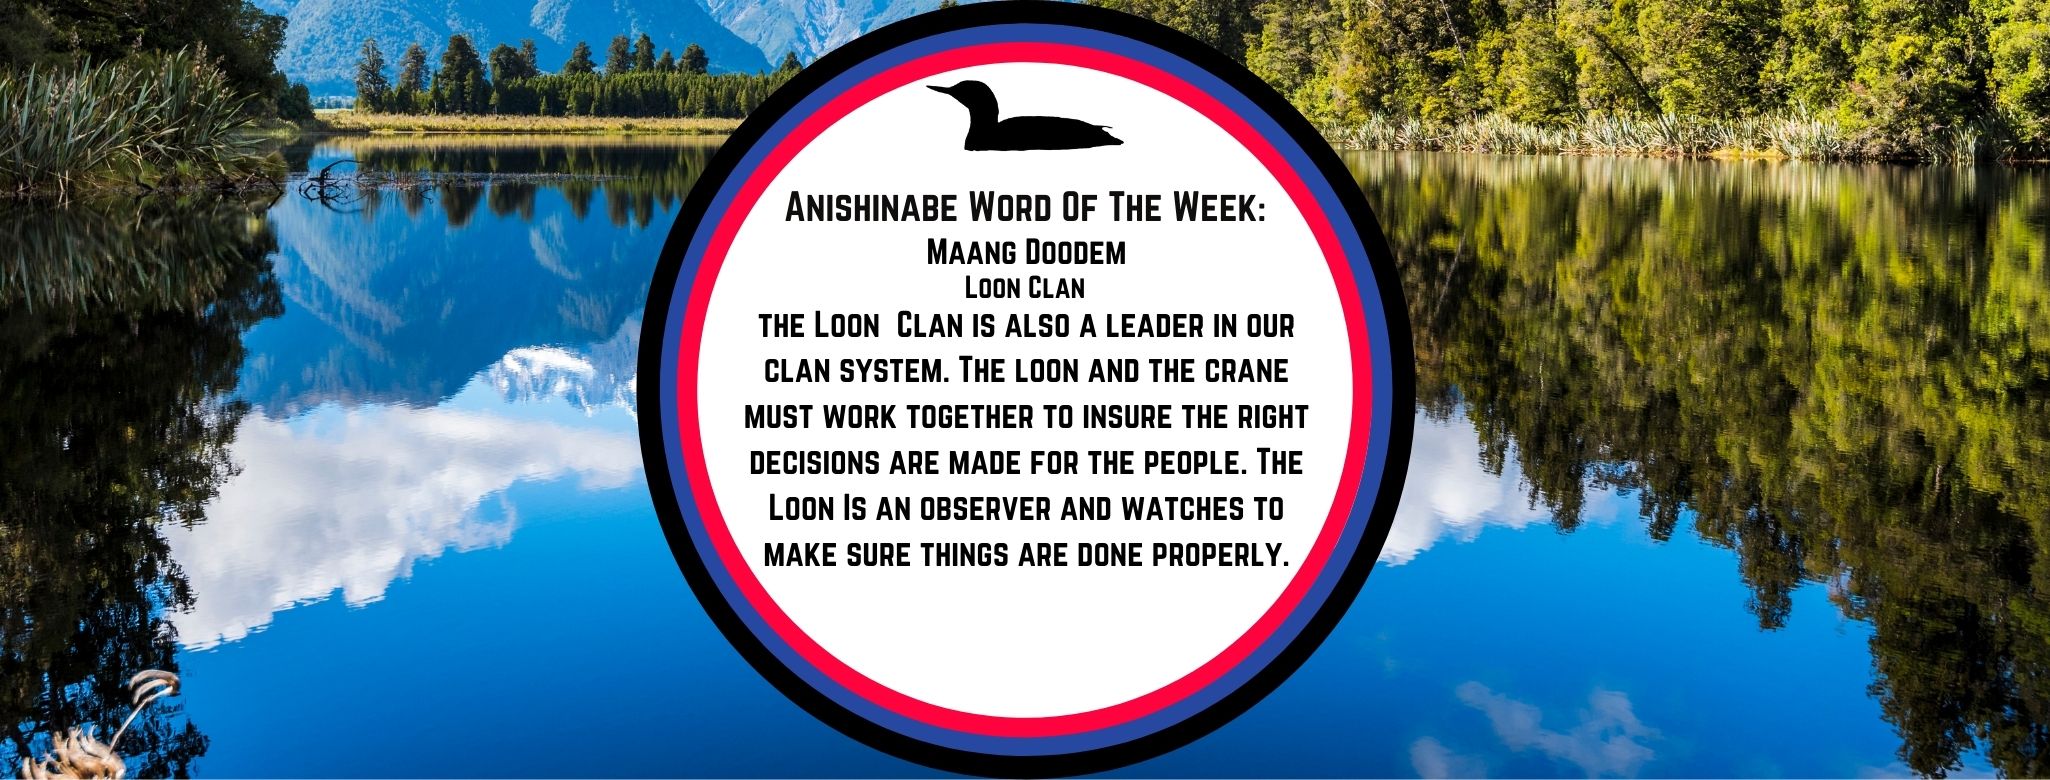 Anishinabe Word of the Week Maang Dodem